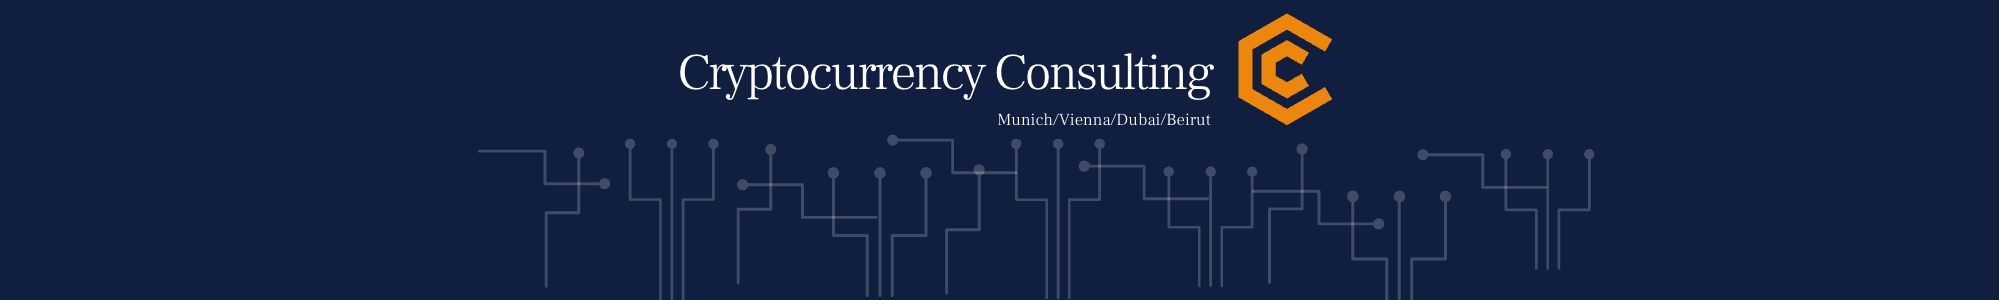 Cryptocurrencyconsulting 배너